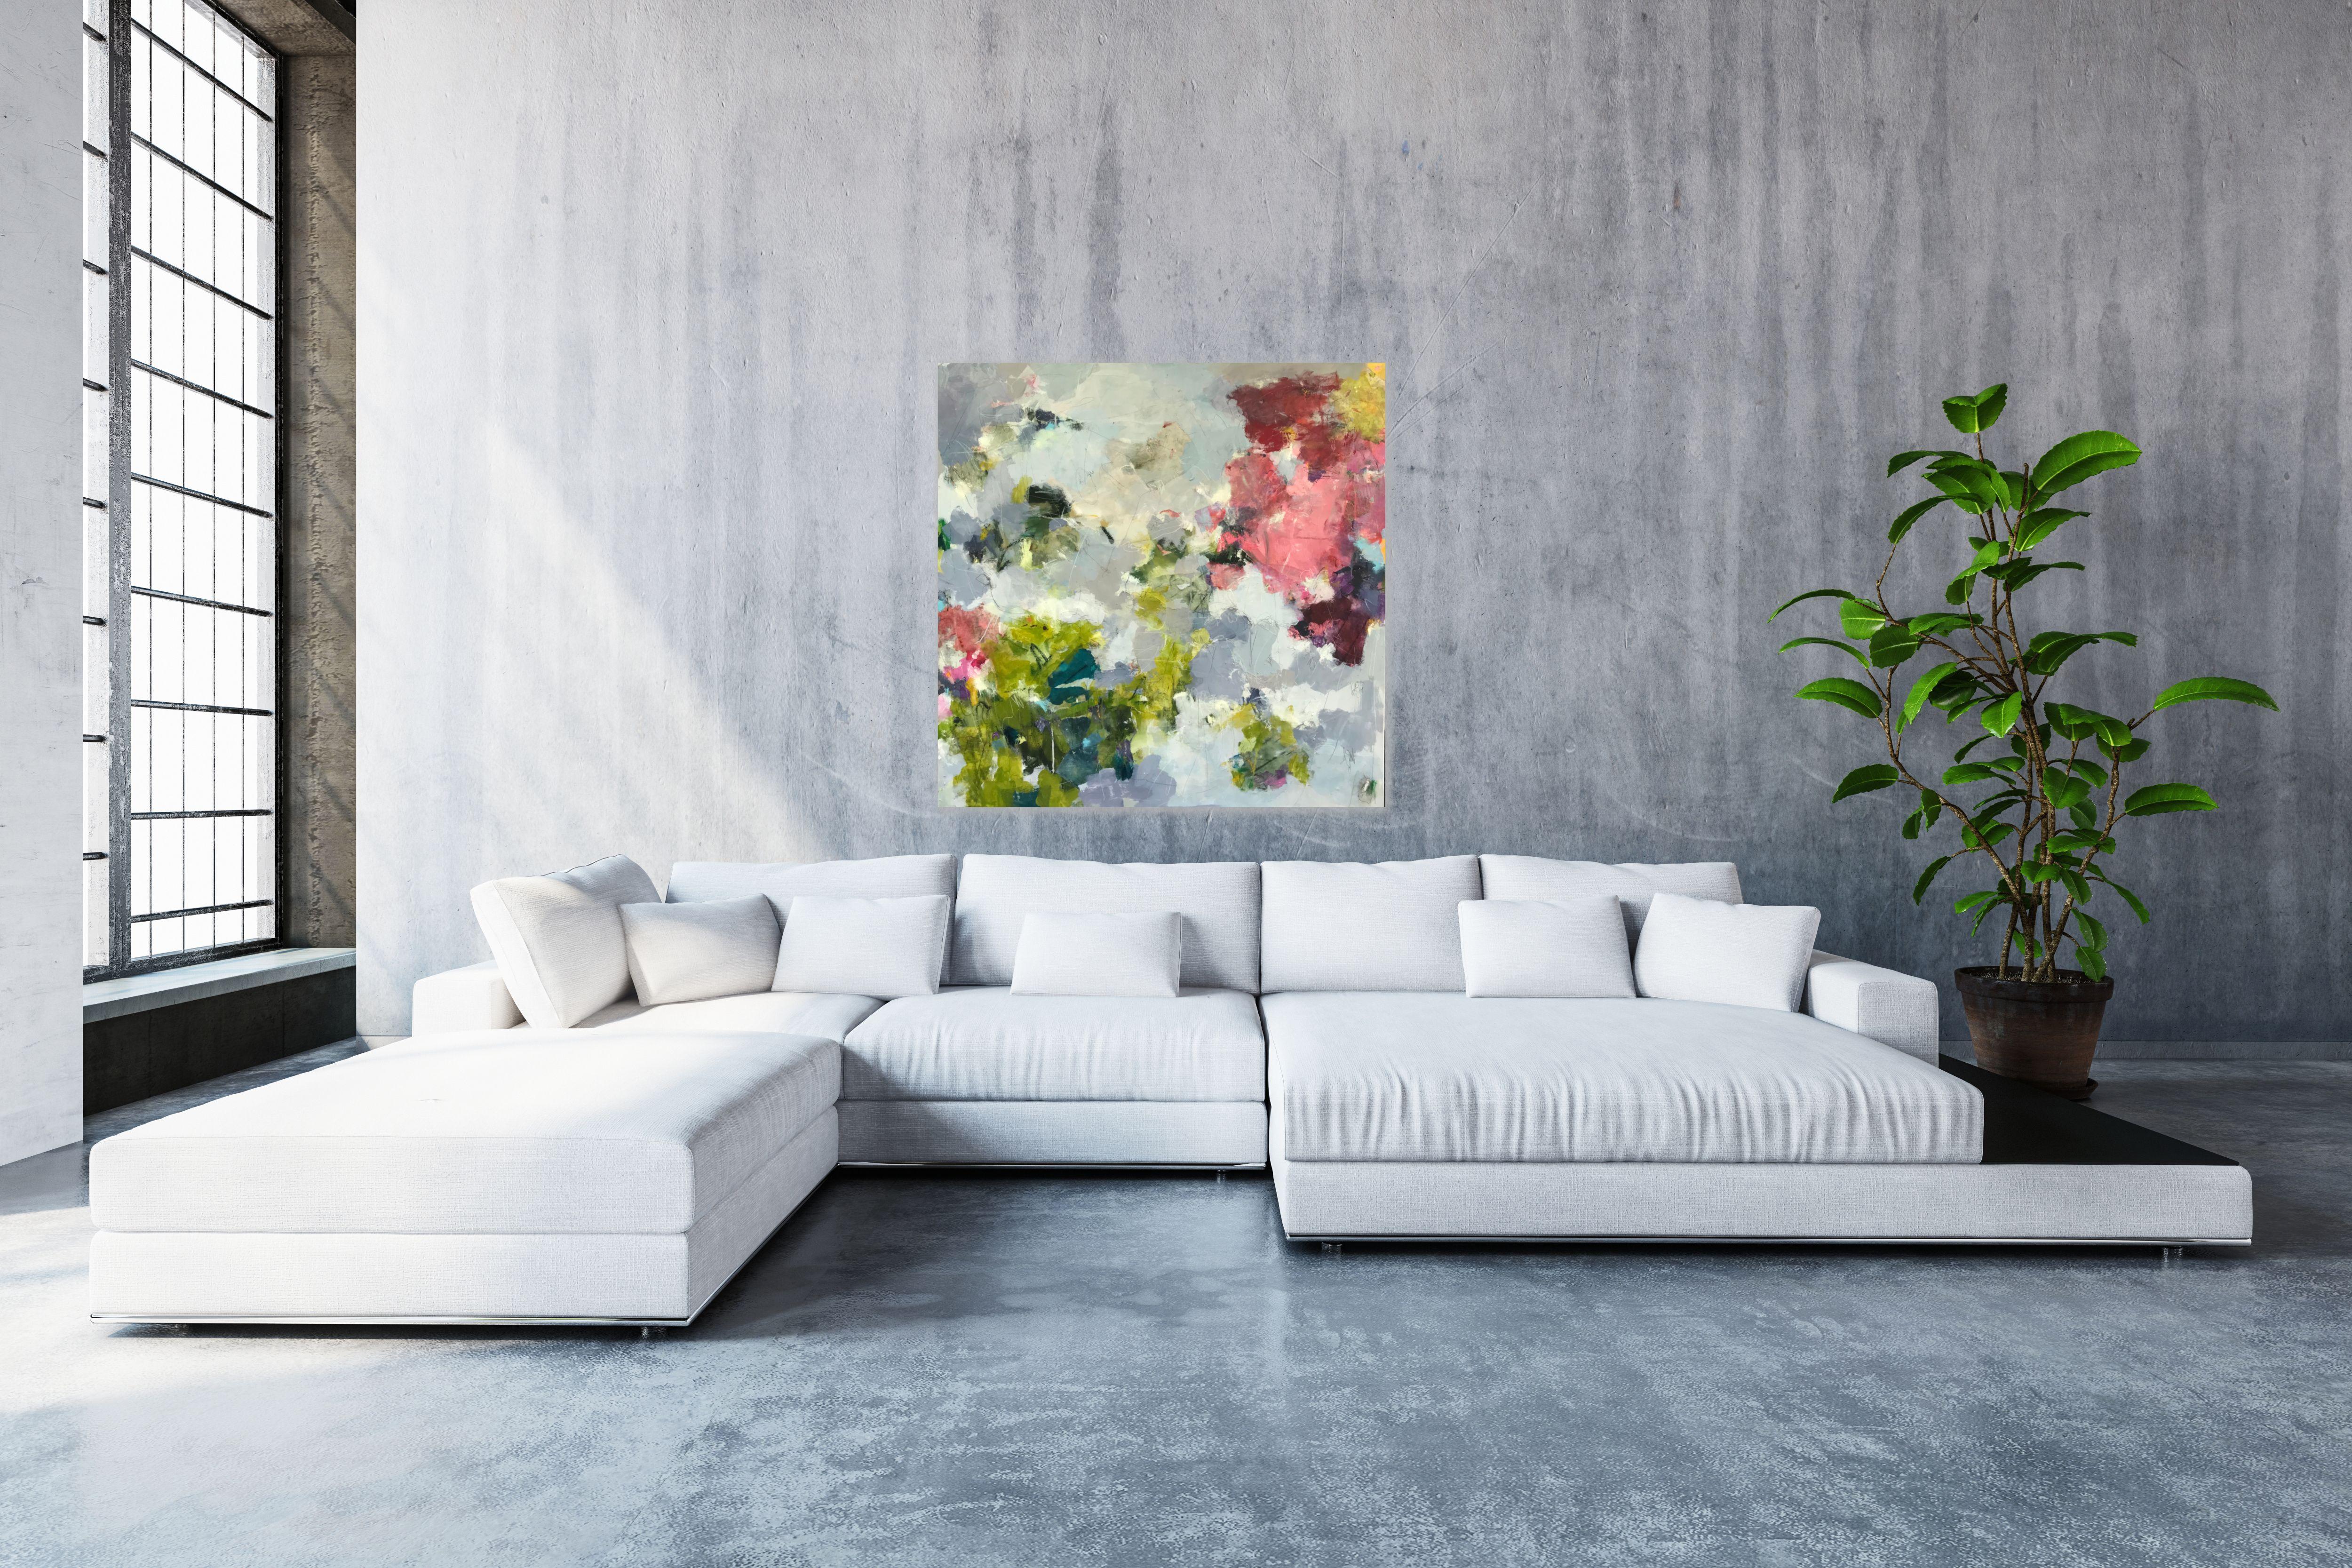 This beautiful, soft and calm abstract floral painting grew out of a slow process; it was built over many layers of paint creating a beautiful deep texture. The starting point for this piece has been the colour scheme of fresh and lush greens, soft